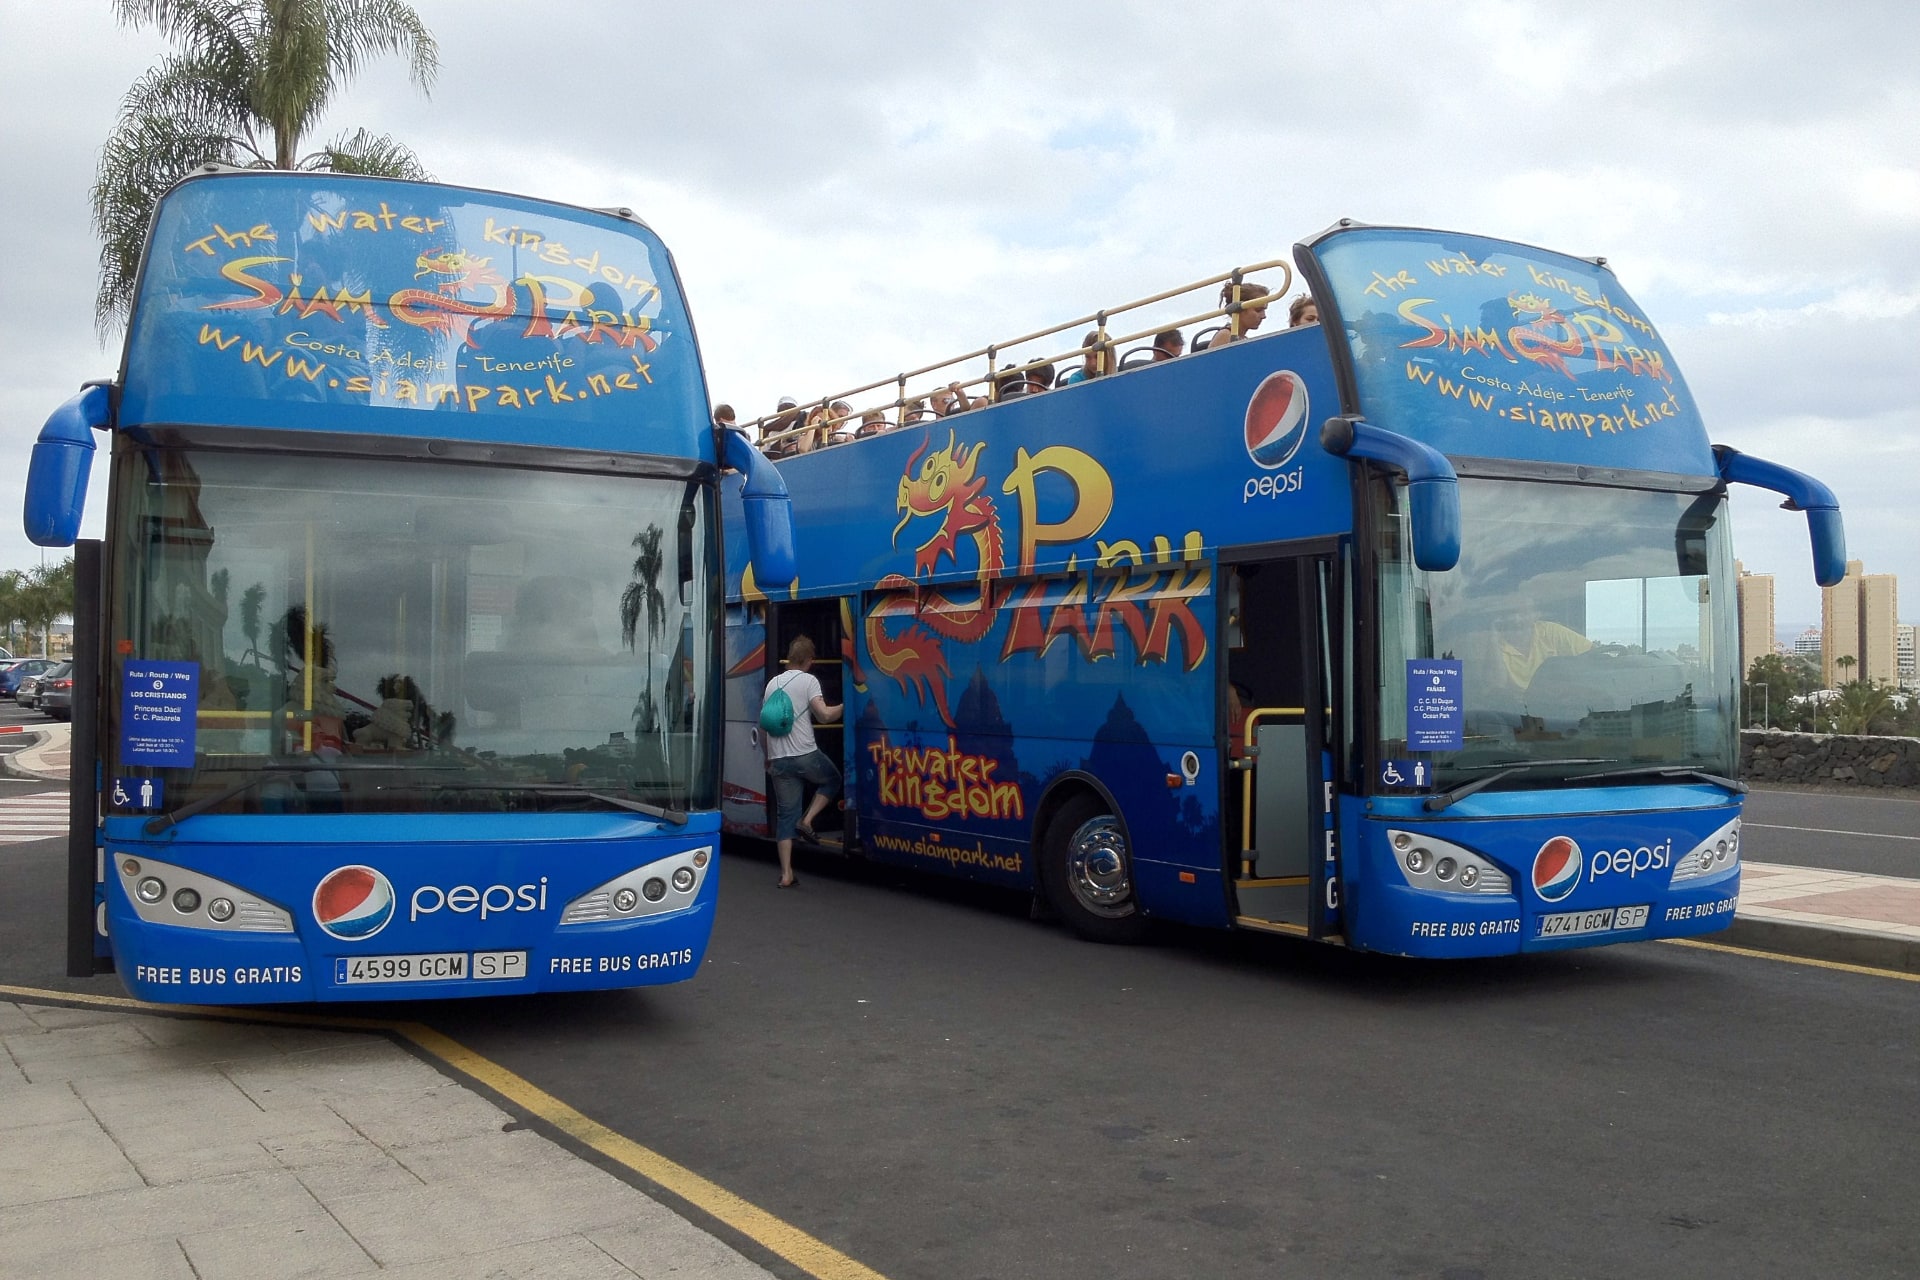 Colorful Siam Park bus, providing convenient transportation to and from the water park in Tenerife